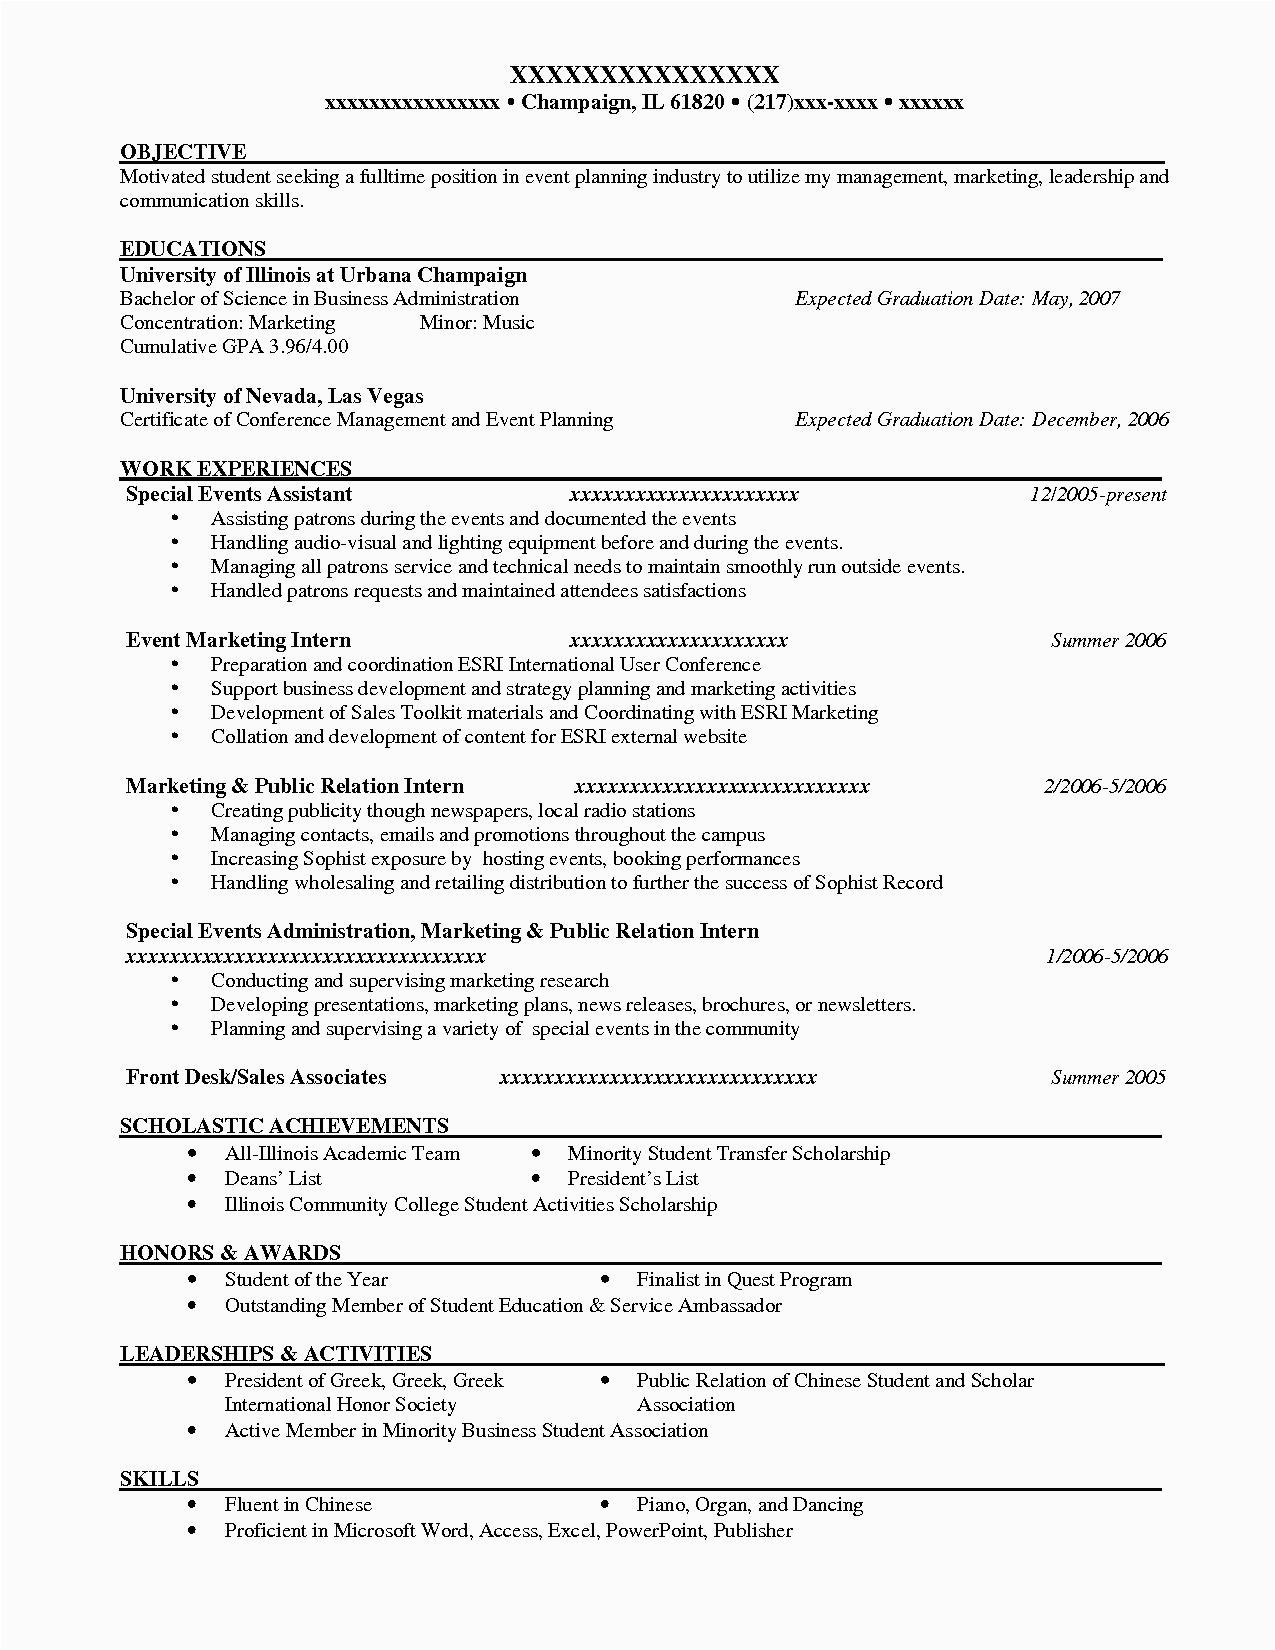 Sample Of A Resume Objective Statement top Tips for Statement Of Objective